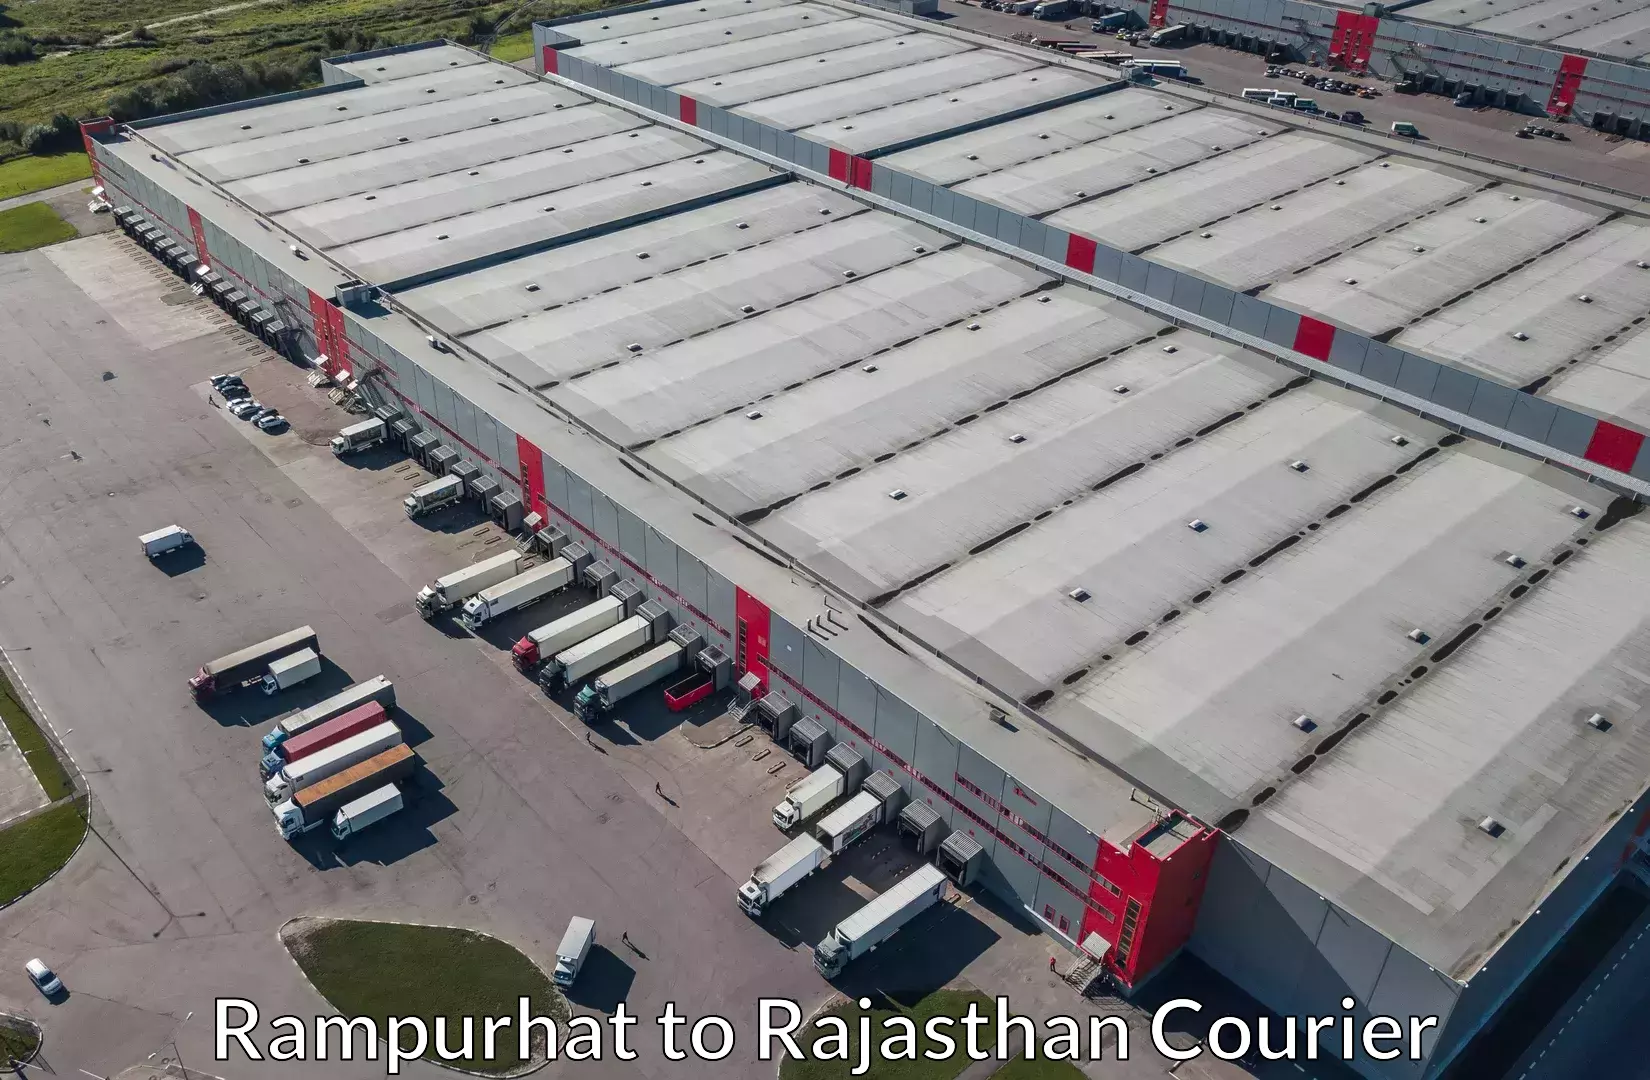 Luggage transport consultancy Rampurhat to Rajasthan